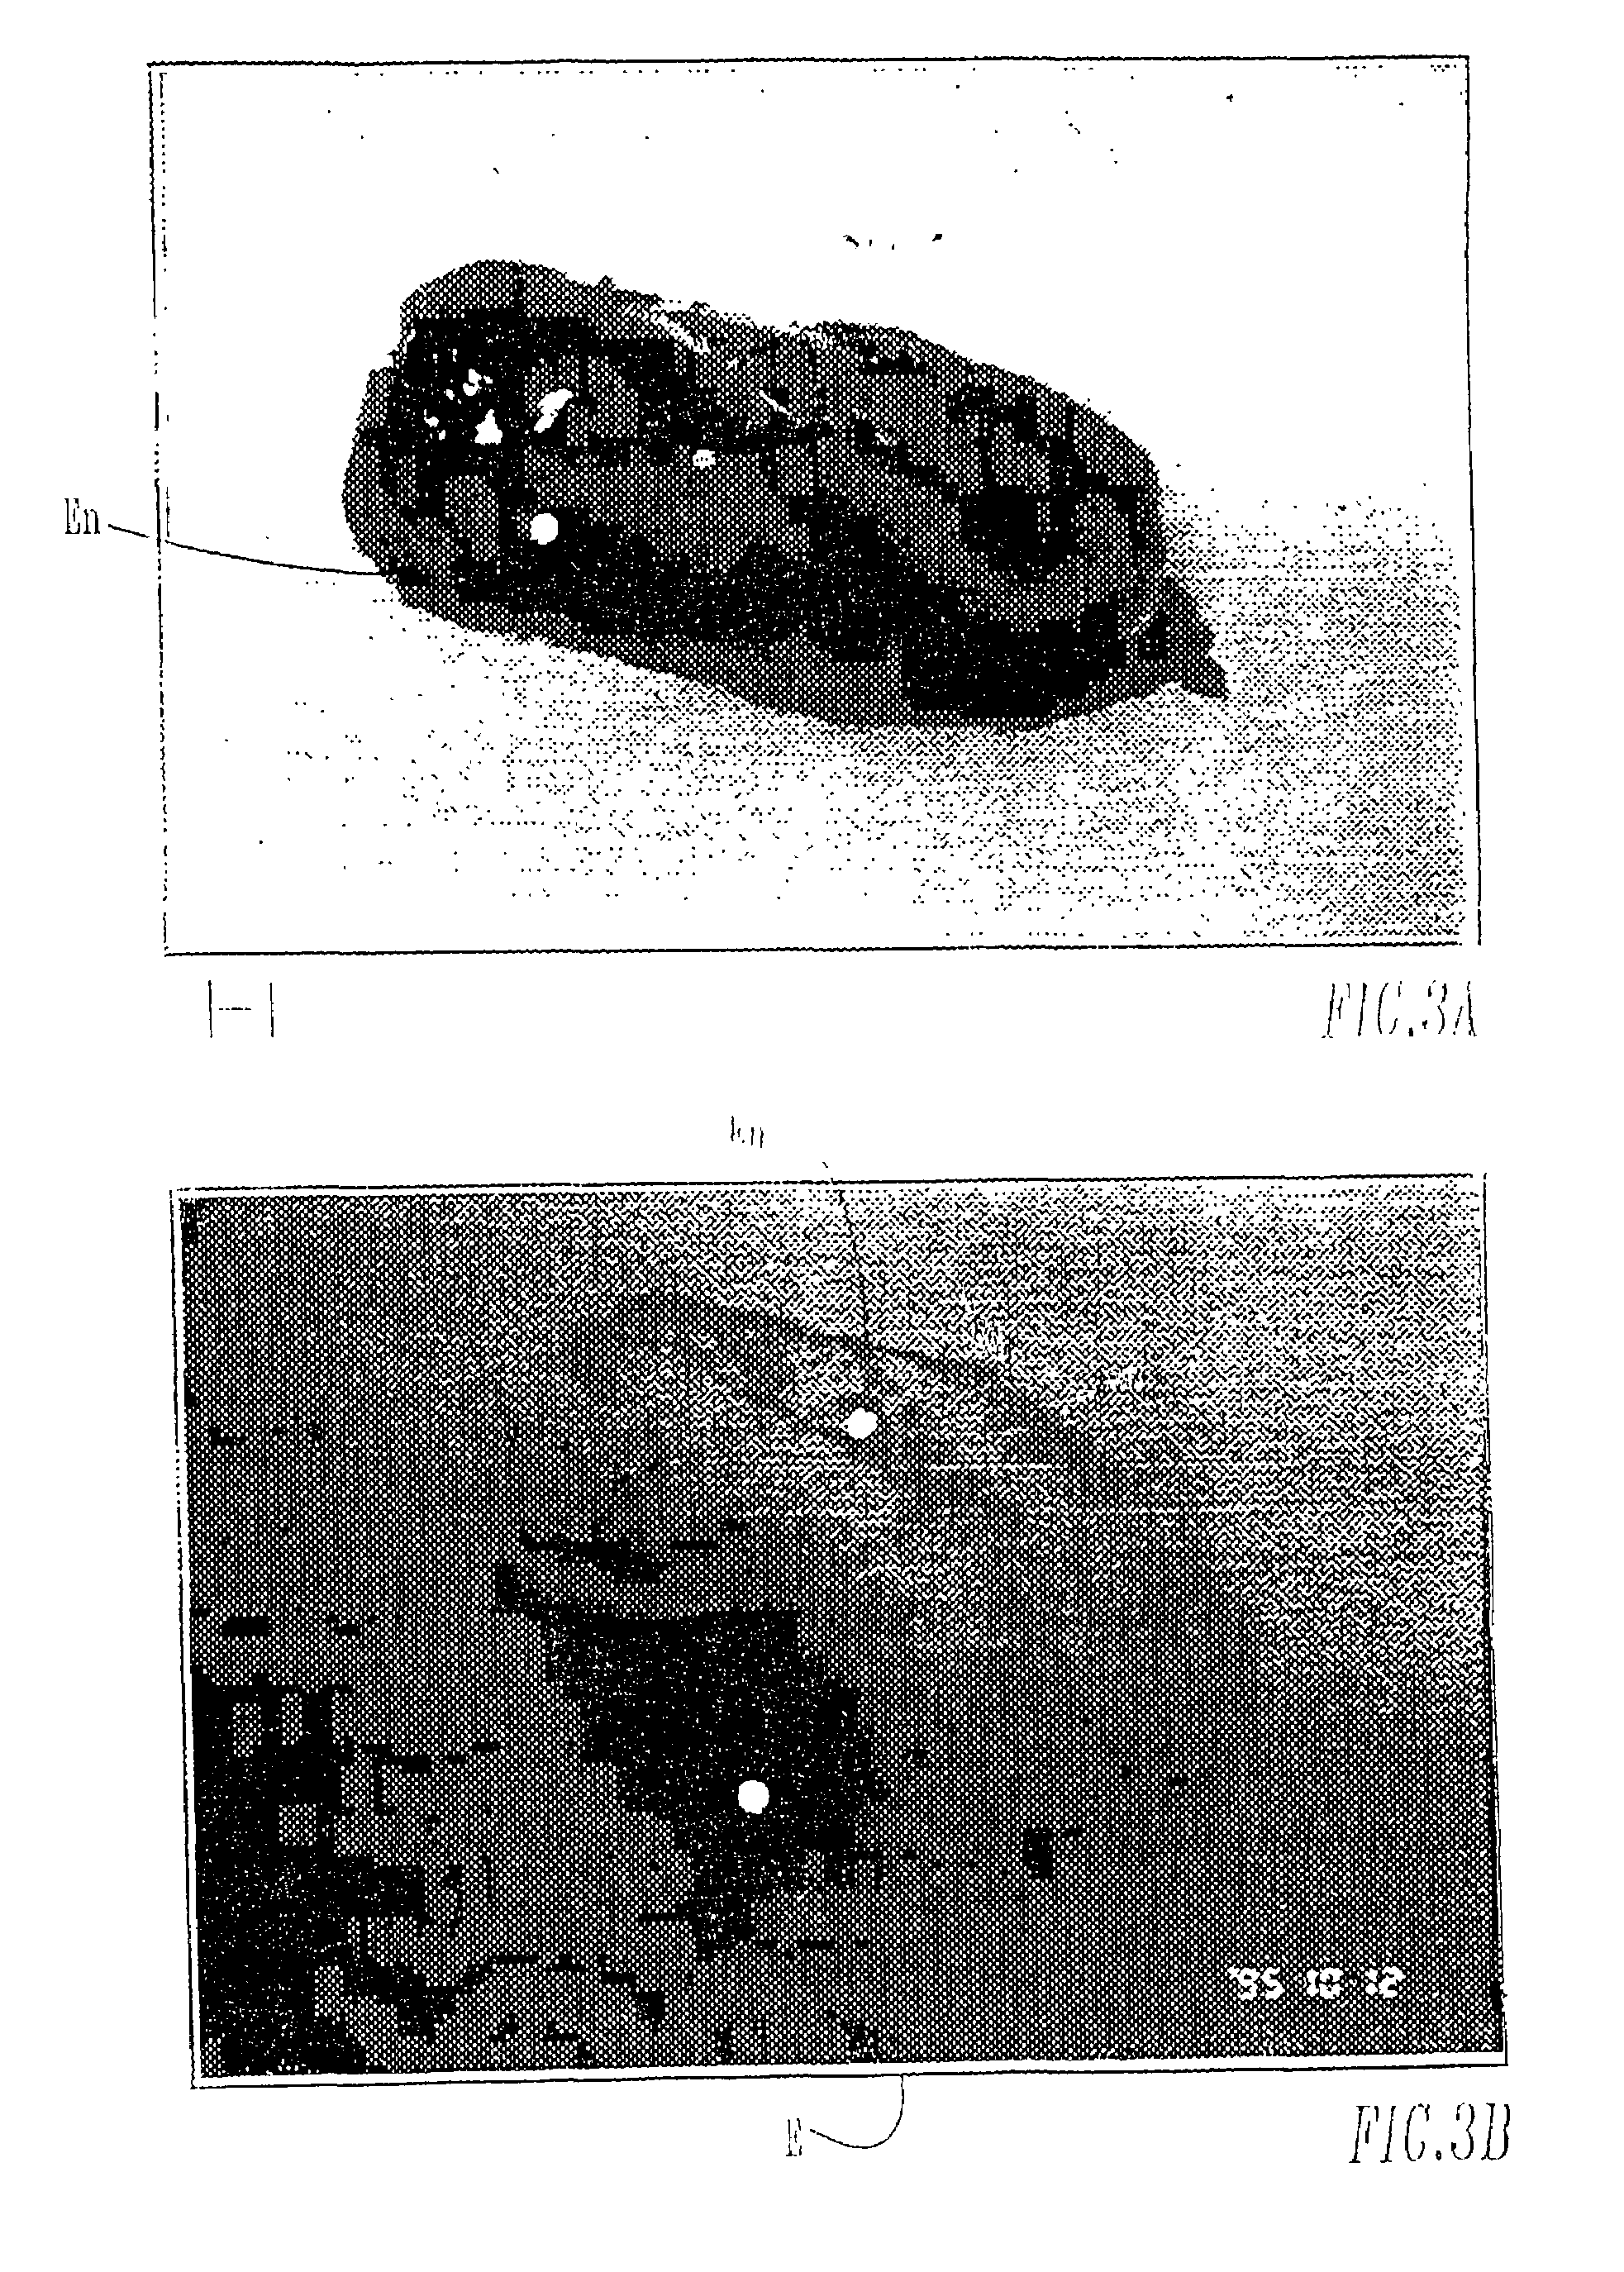 Methods for commercial production of heterologous laccase in plant tissue and extraction of the laccase from plant seed